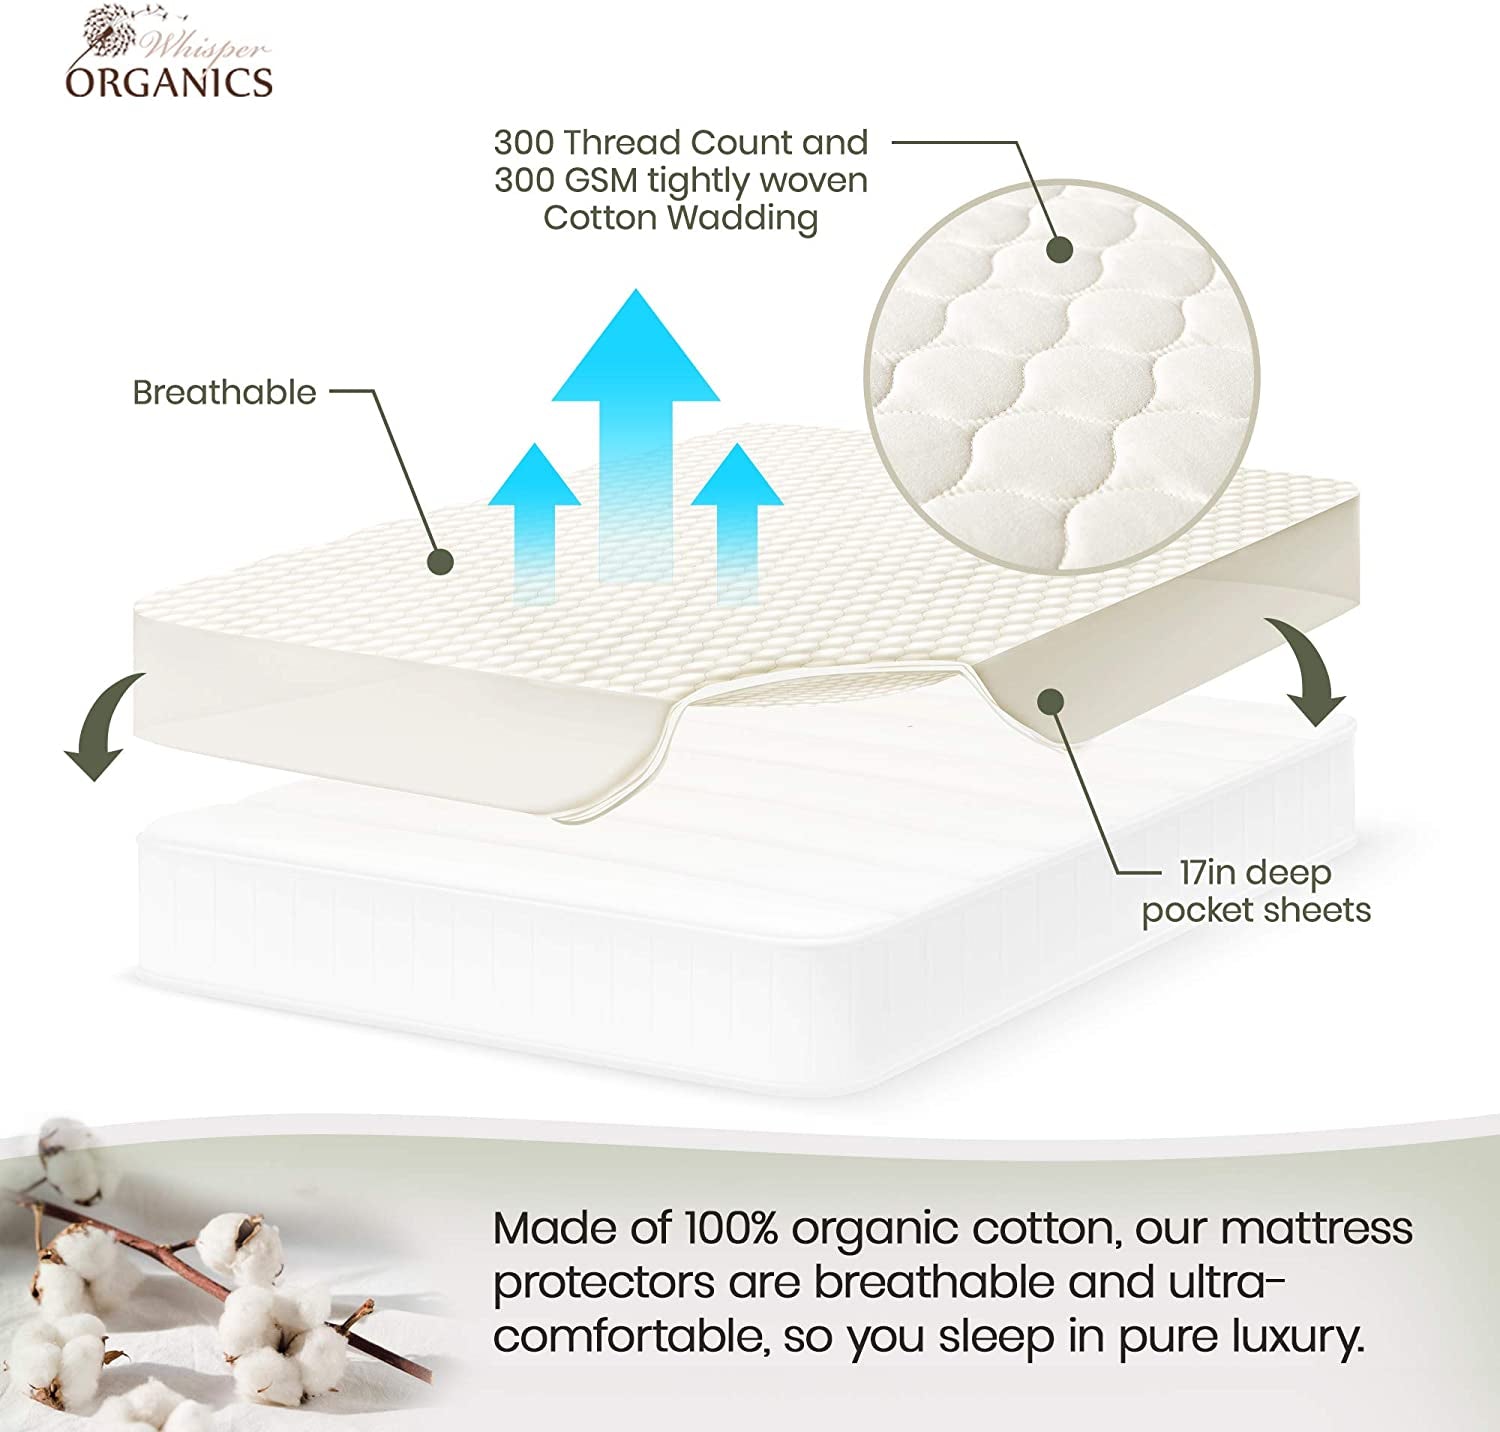 Whisper Organics, 100% Organic Cotton Mattress Protector - Quilted Fitted Mattress Pad Cover, GOTS Certified Breathable Mattress Protector - Ivory Color, 17" Deep Pocket (Queen Size Bed)